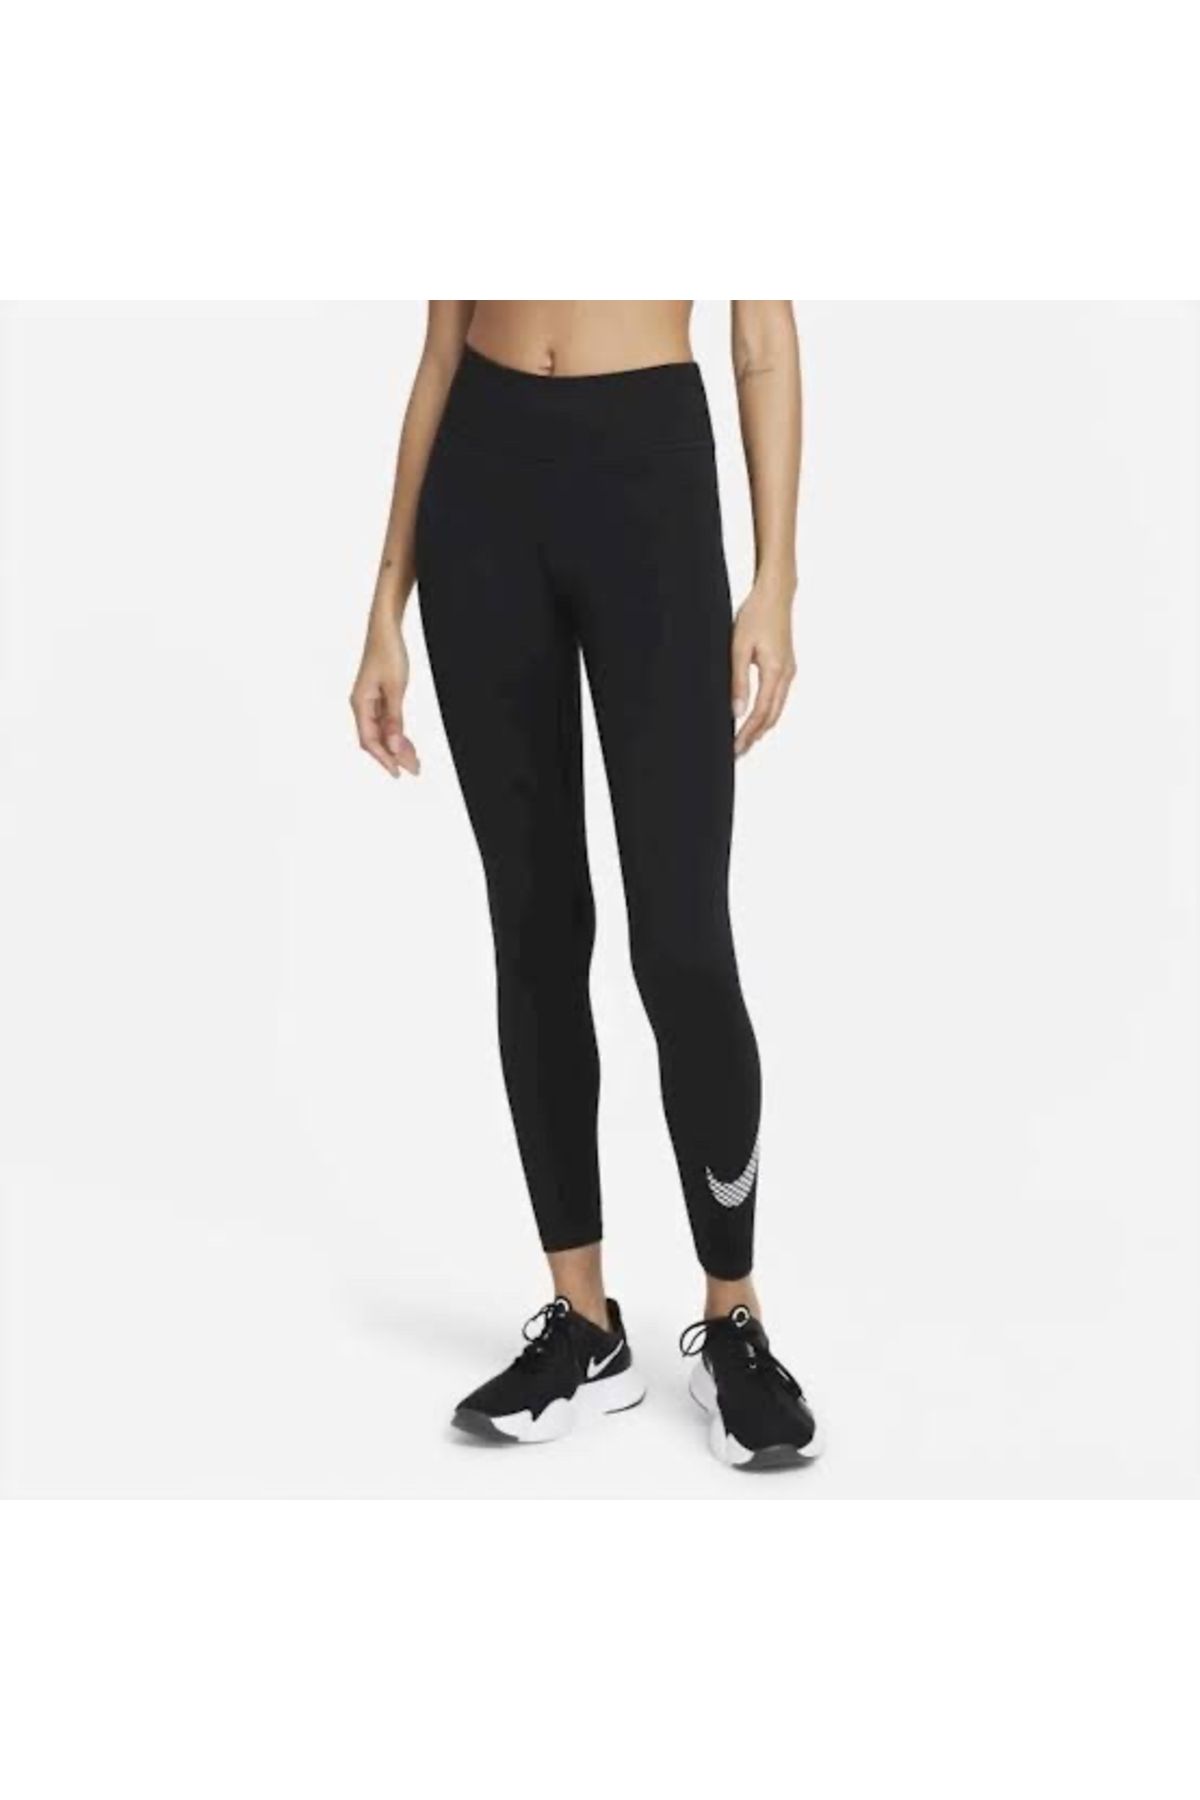 Nike Dri-fit One Icon Clash Mid-rise Graphic Women's Tights - Trendyol